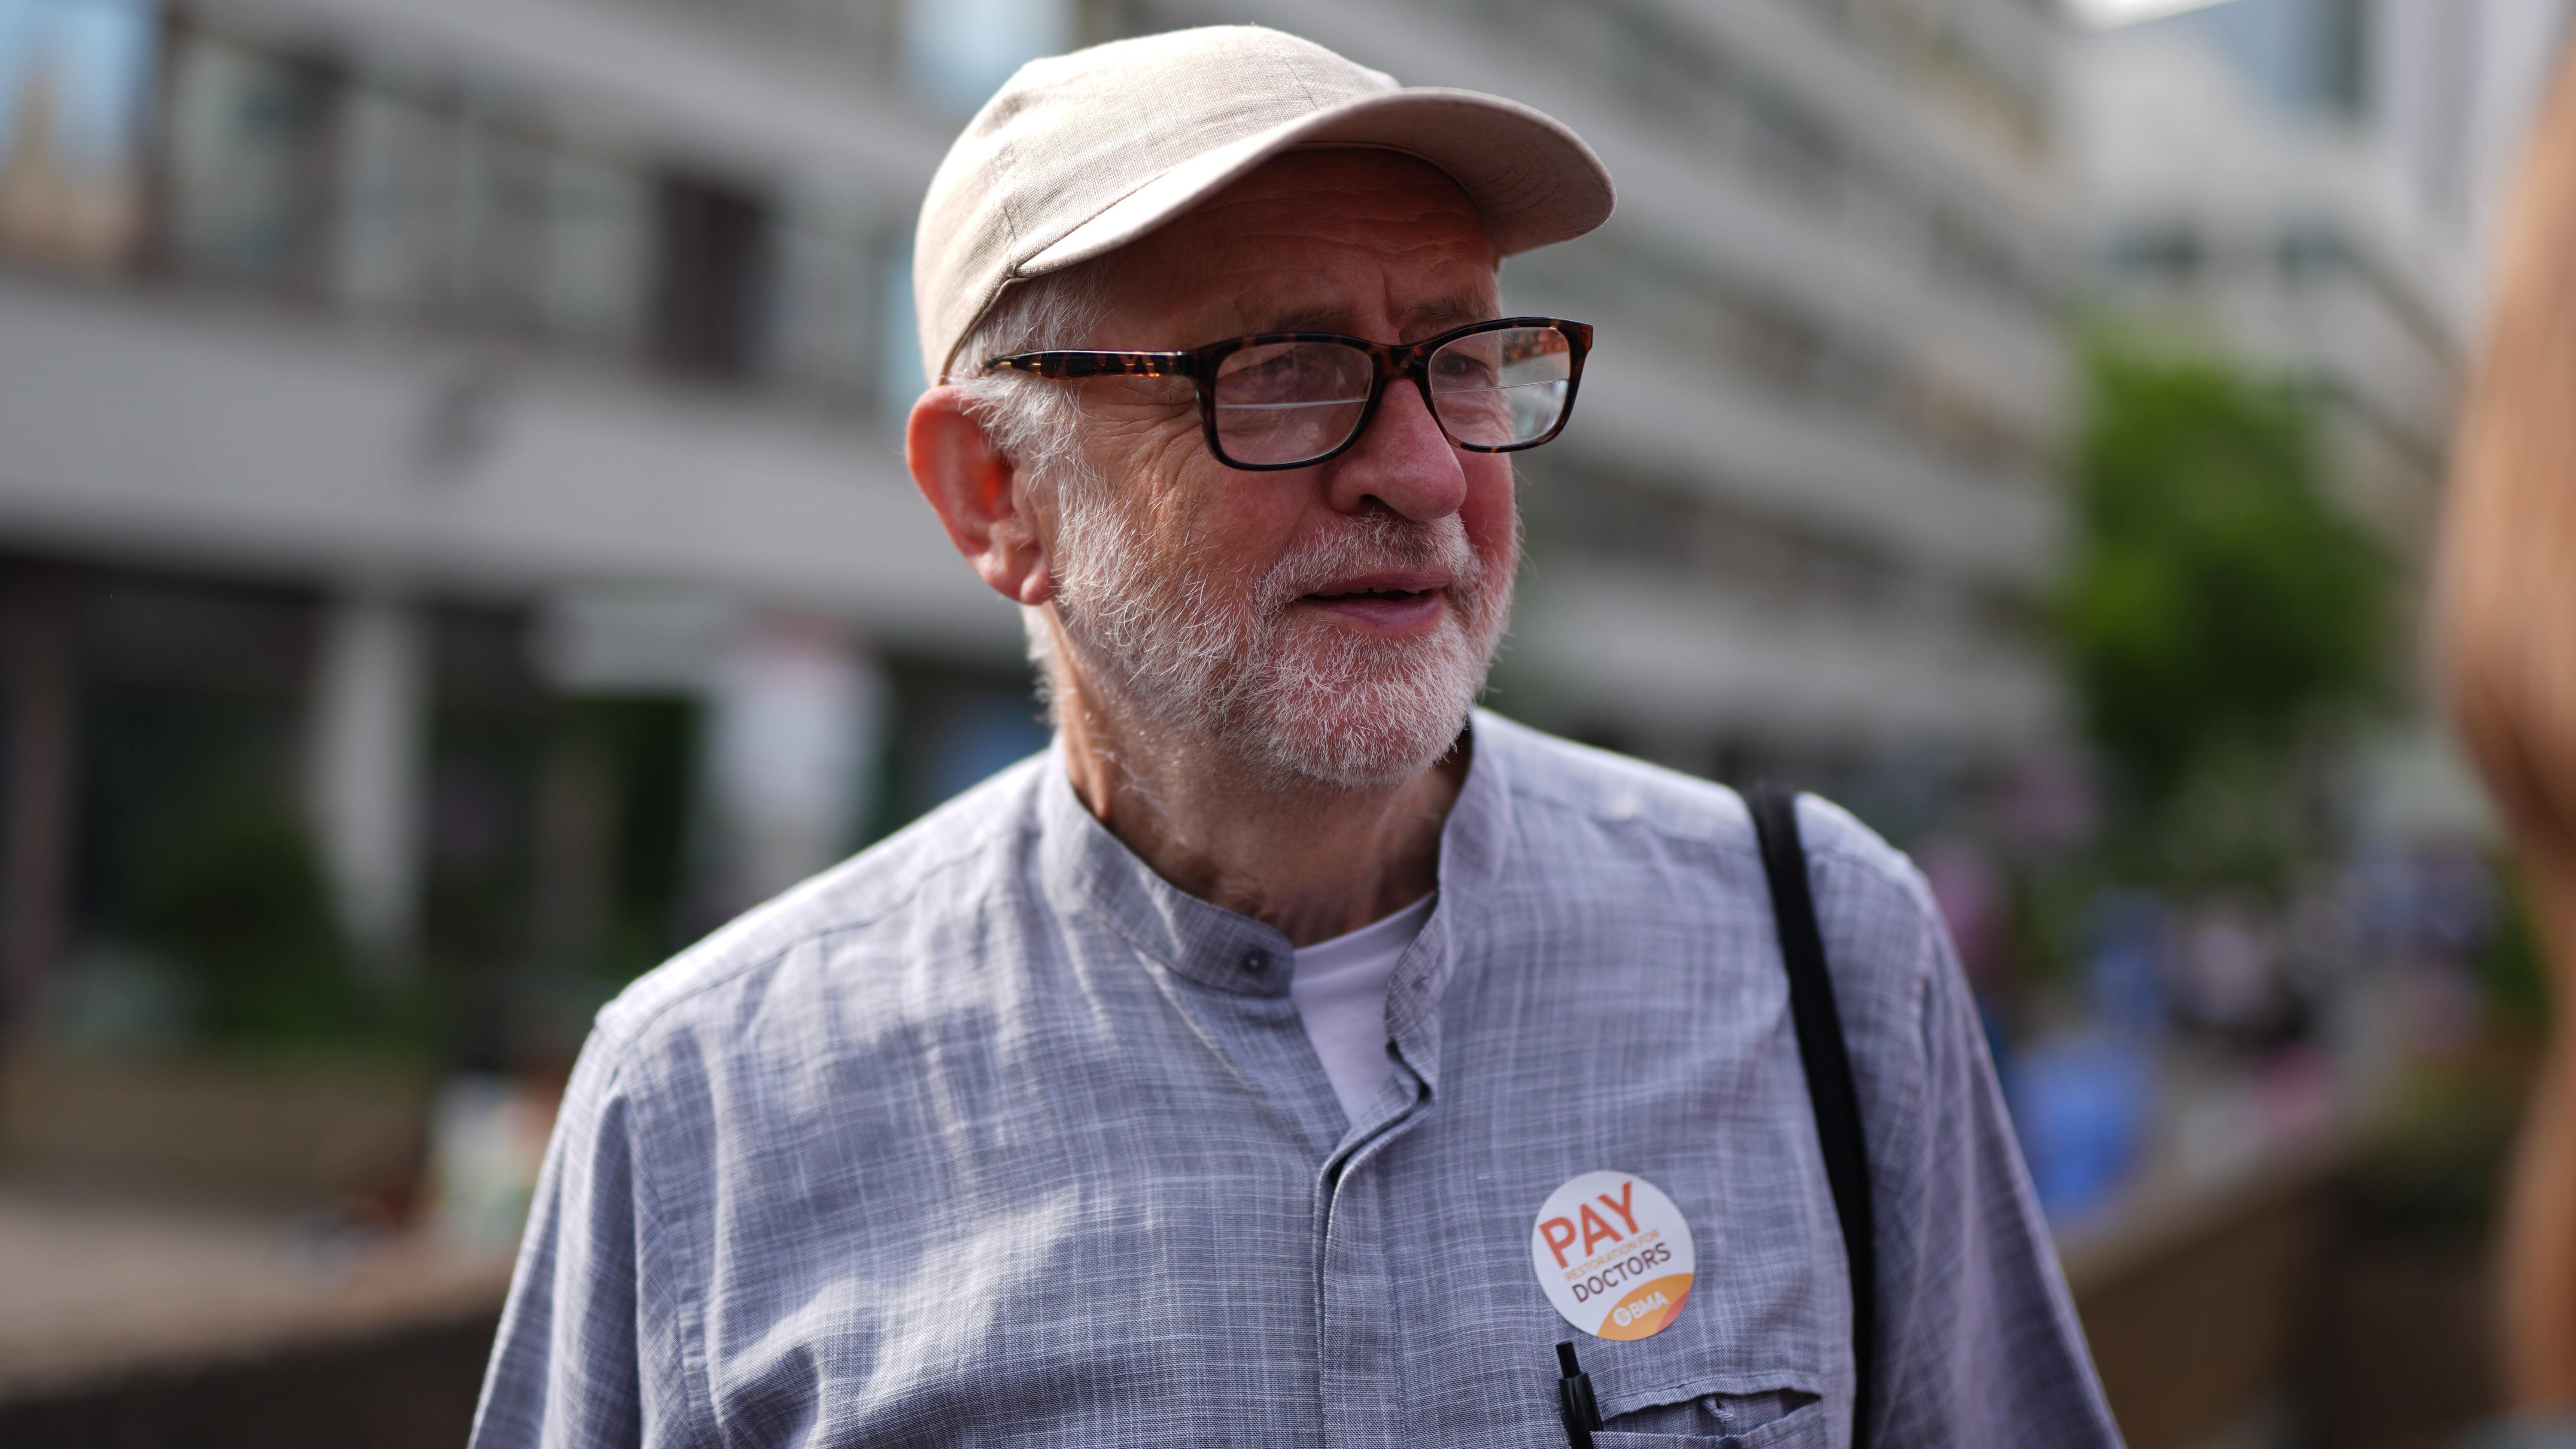 Corbyn talks of ‘new movement capable of challenging stale two-party system’